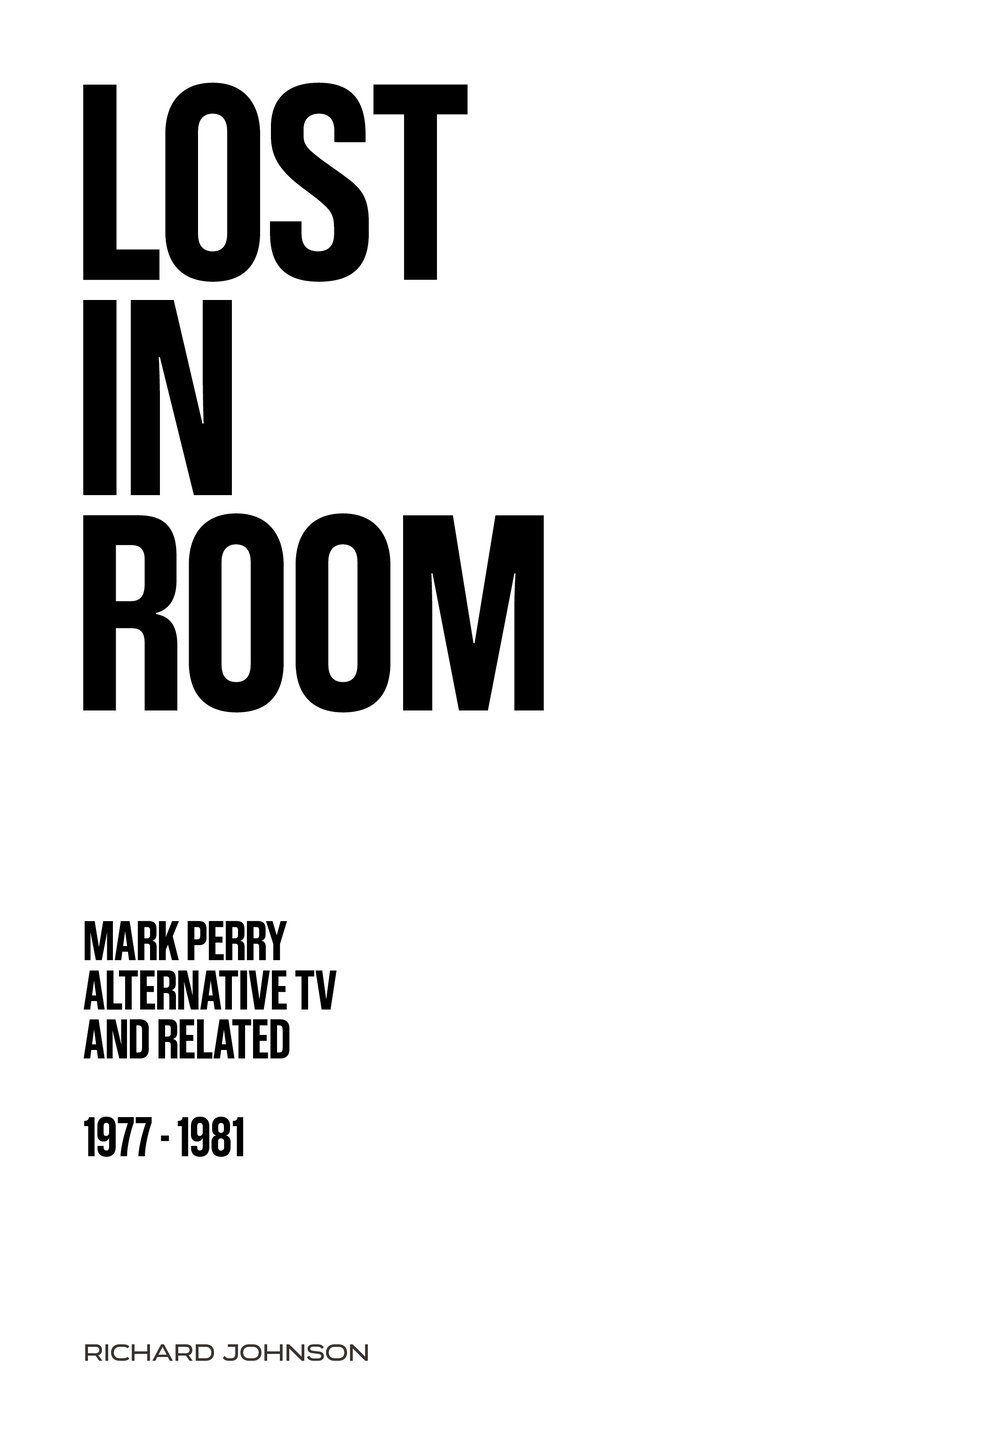 Image of Lost in Room: Mark Perry, Alternative TV and Related, 1977 - 1981 book softcover 